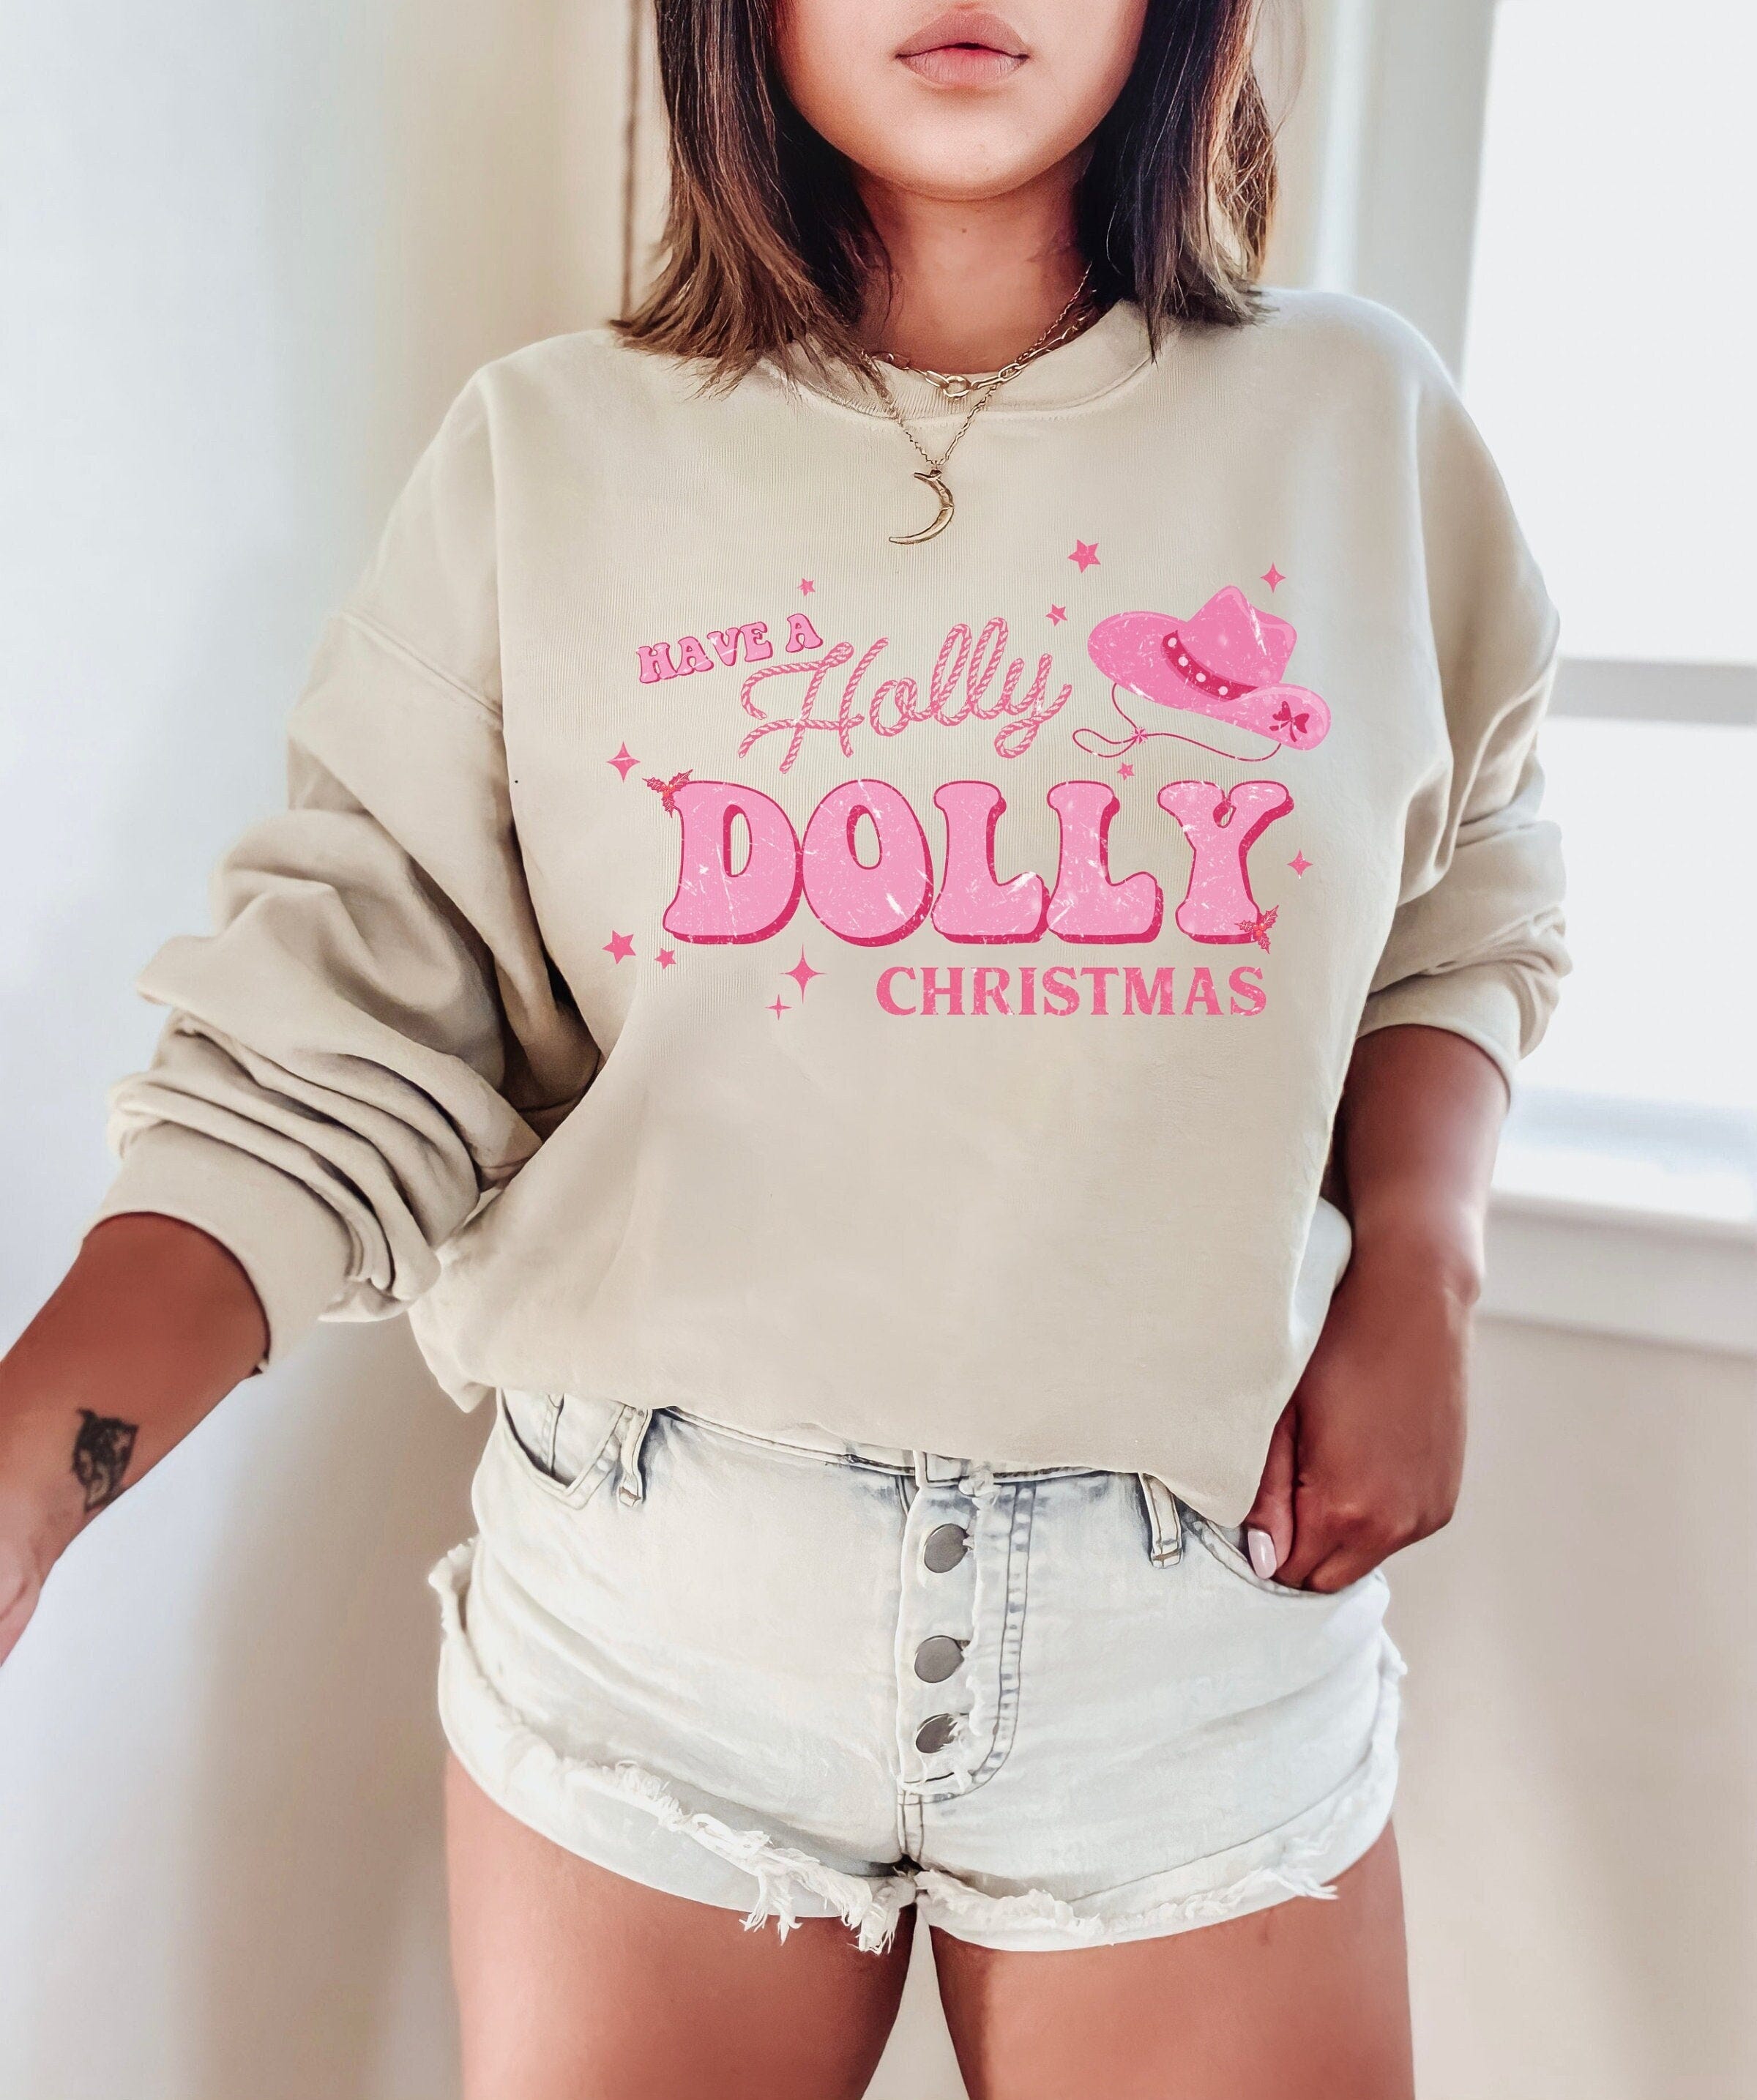 Have a Holly Dolly Christmas Sweatshirt, Western Christmas, Holly Dolly Christmas Crewneck, Cowgirl shirt, Holiday Sweater, Pink Christmas